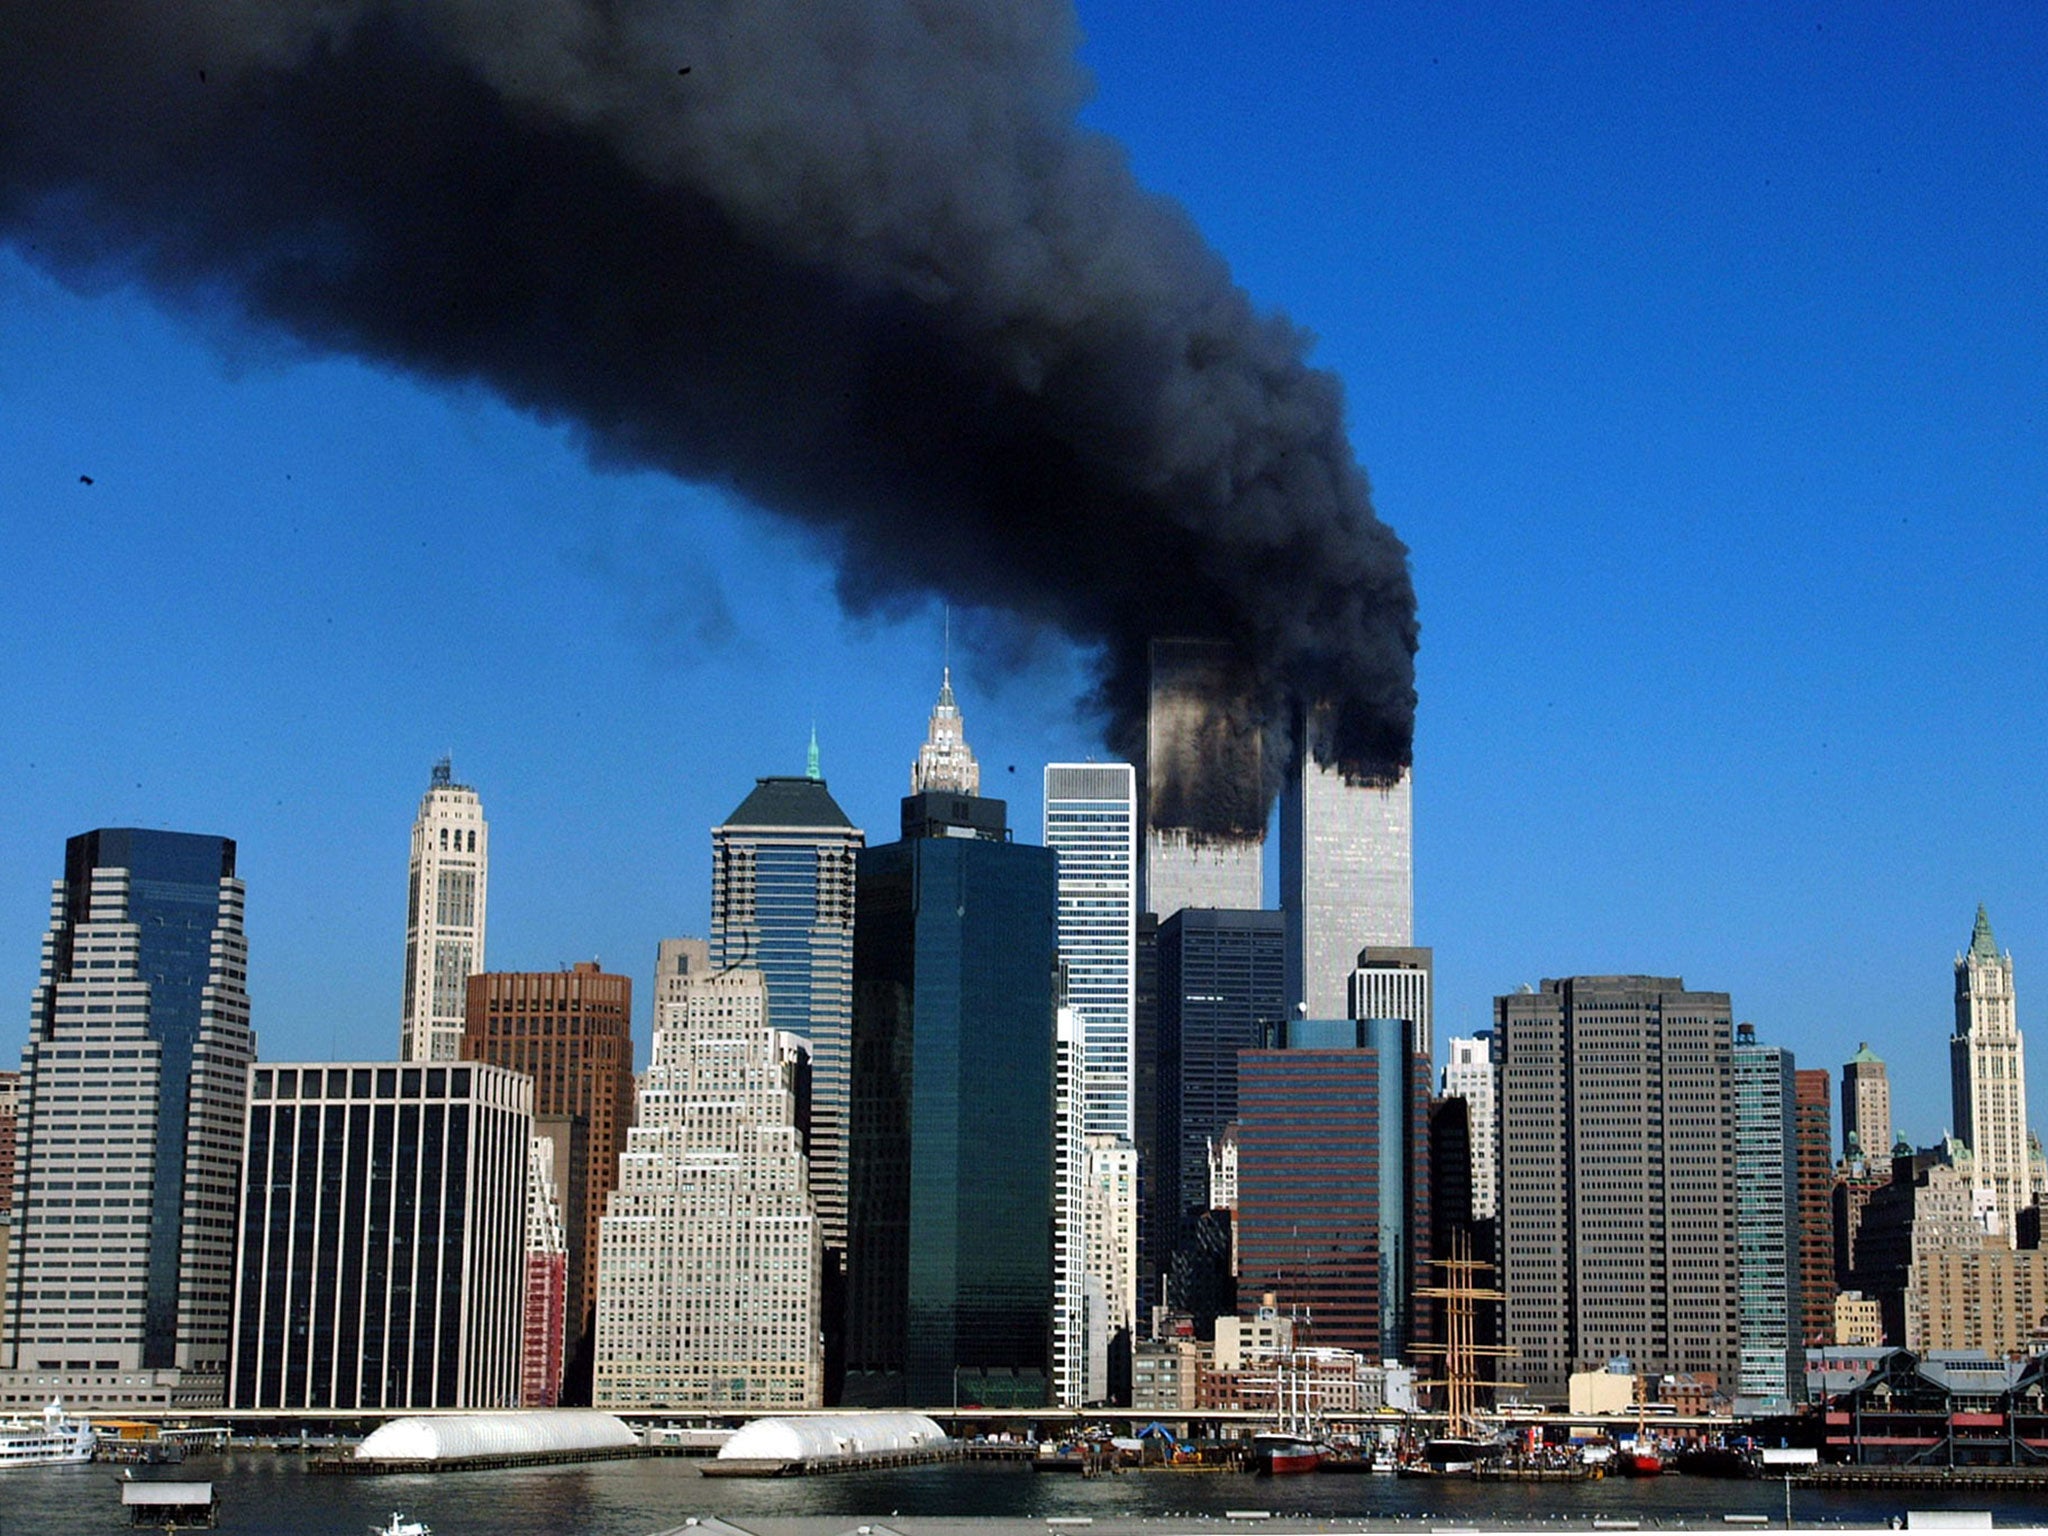 The twin towers of the World Trade Center billow smoke after hijacked airliners crashed into them early 11 September, 2001